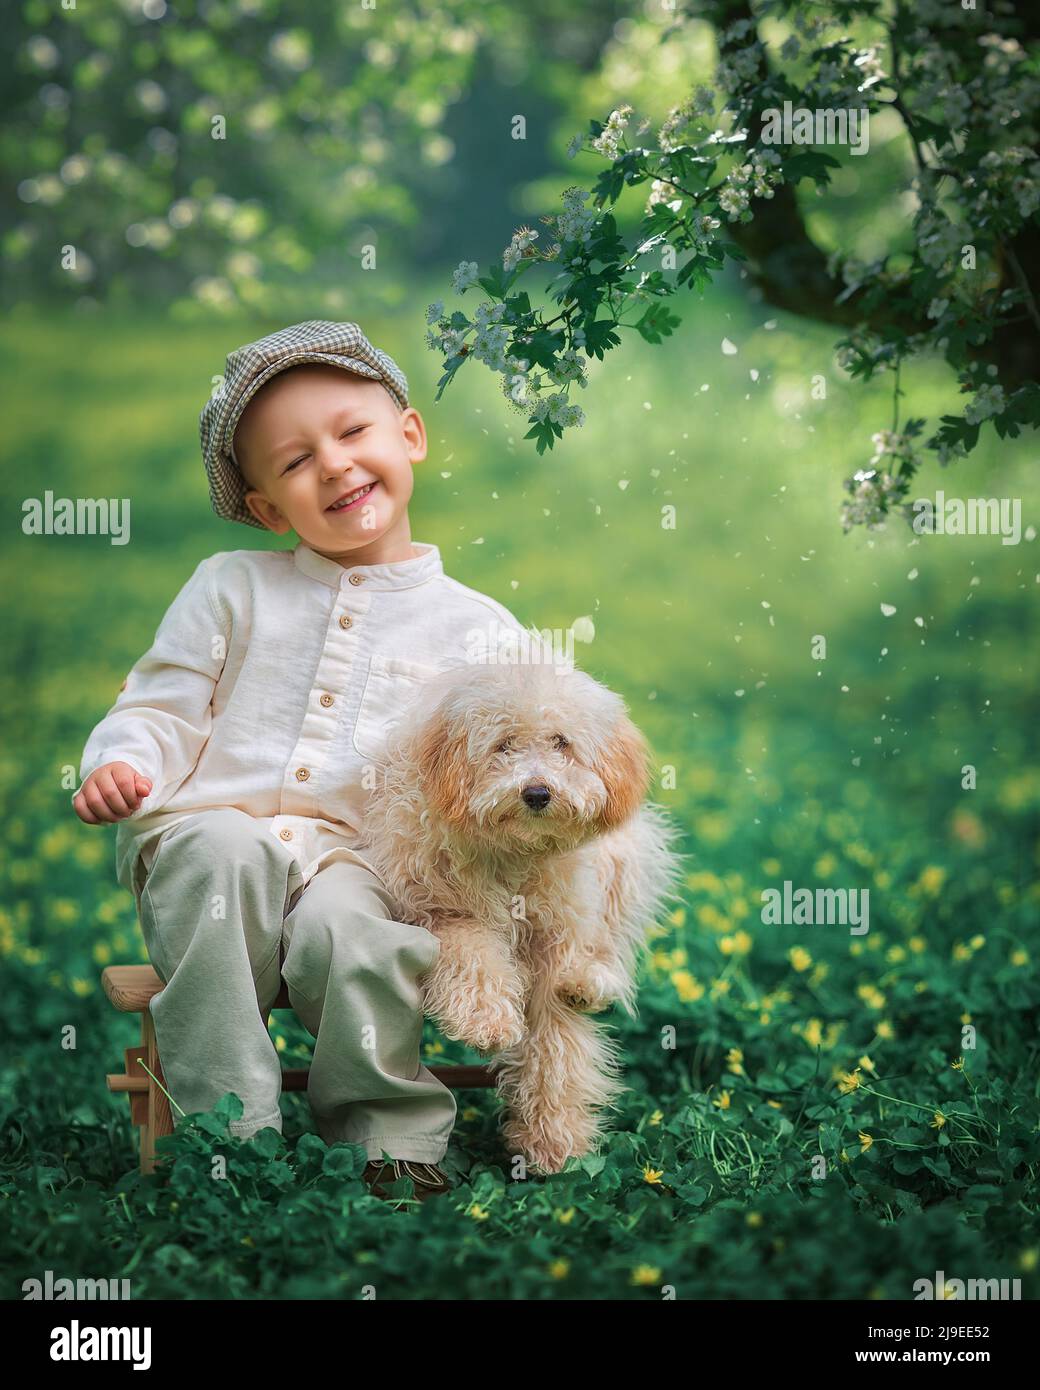 Young boy kid and his dog poodle on the grass together. Happy child hugging his pet smiling with his eyes closed. Stock Photo